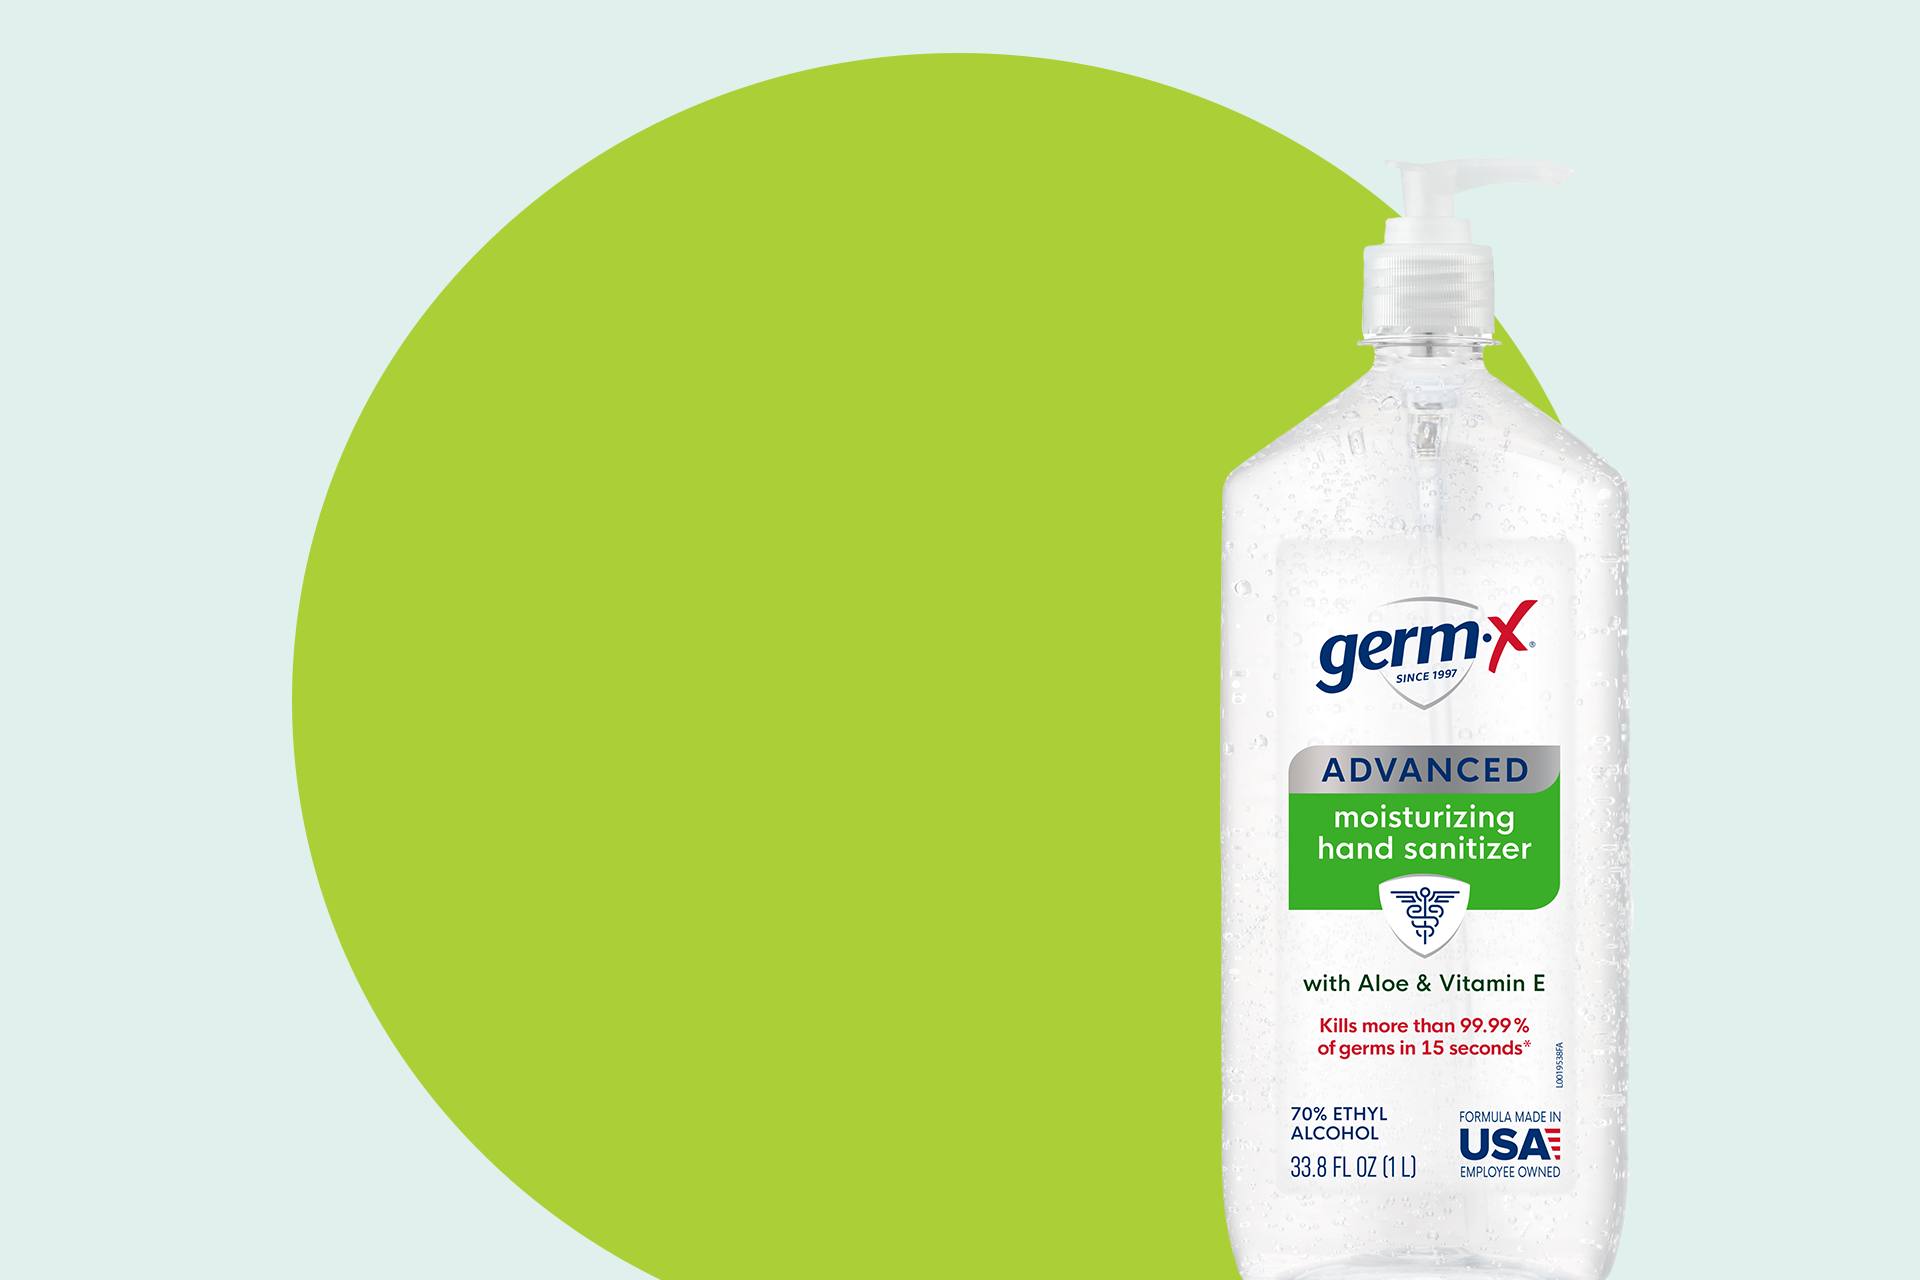 germ-x hand sanitizer label supplier during covid pandemic